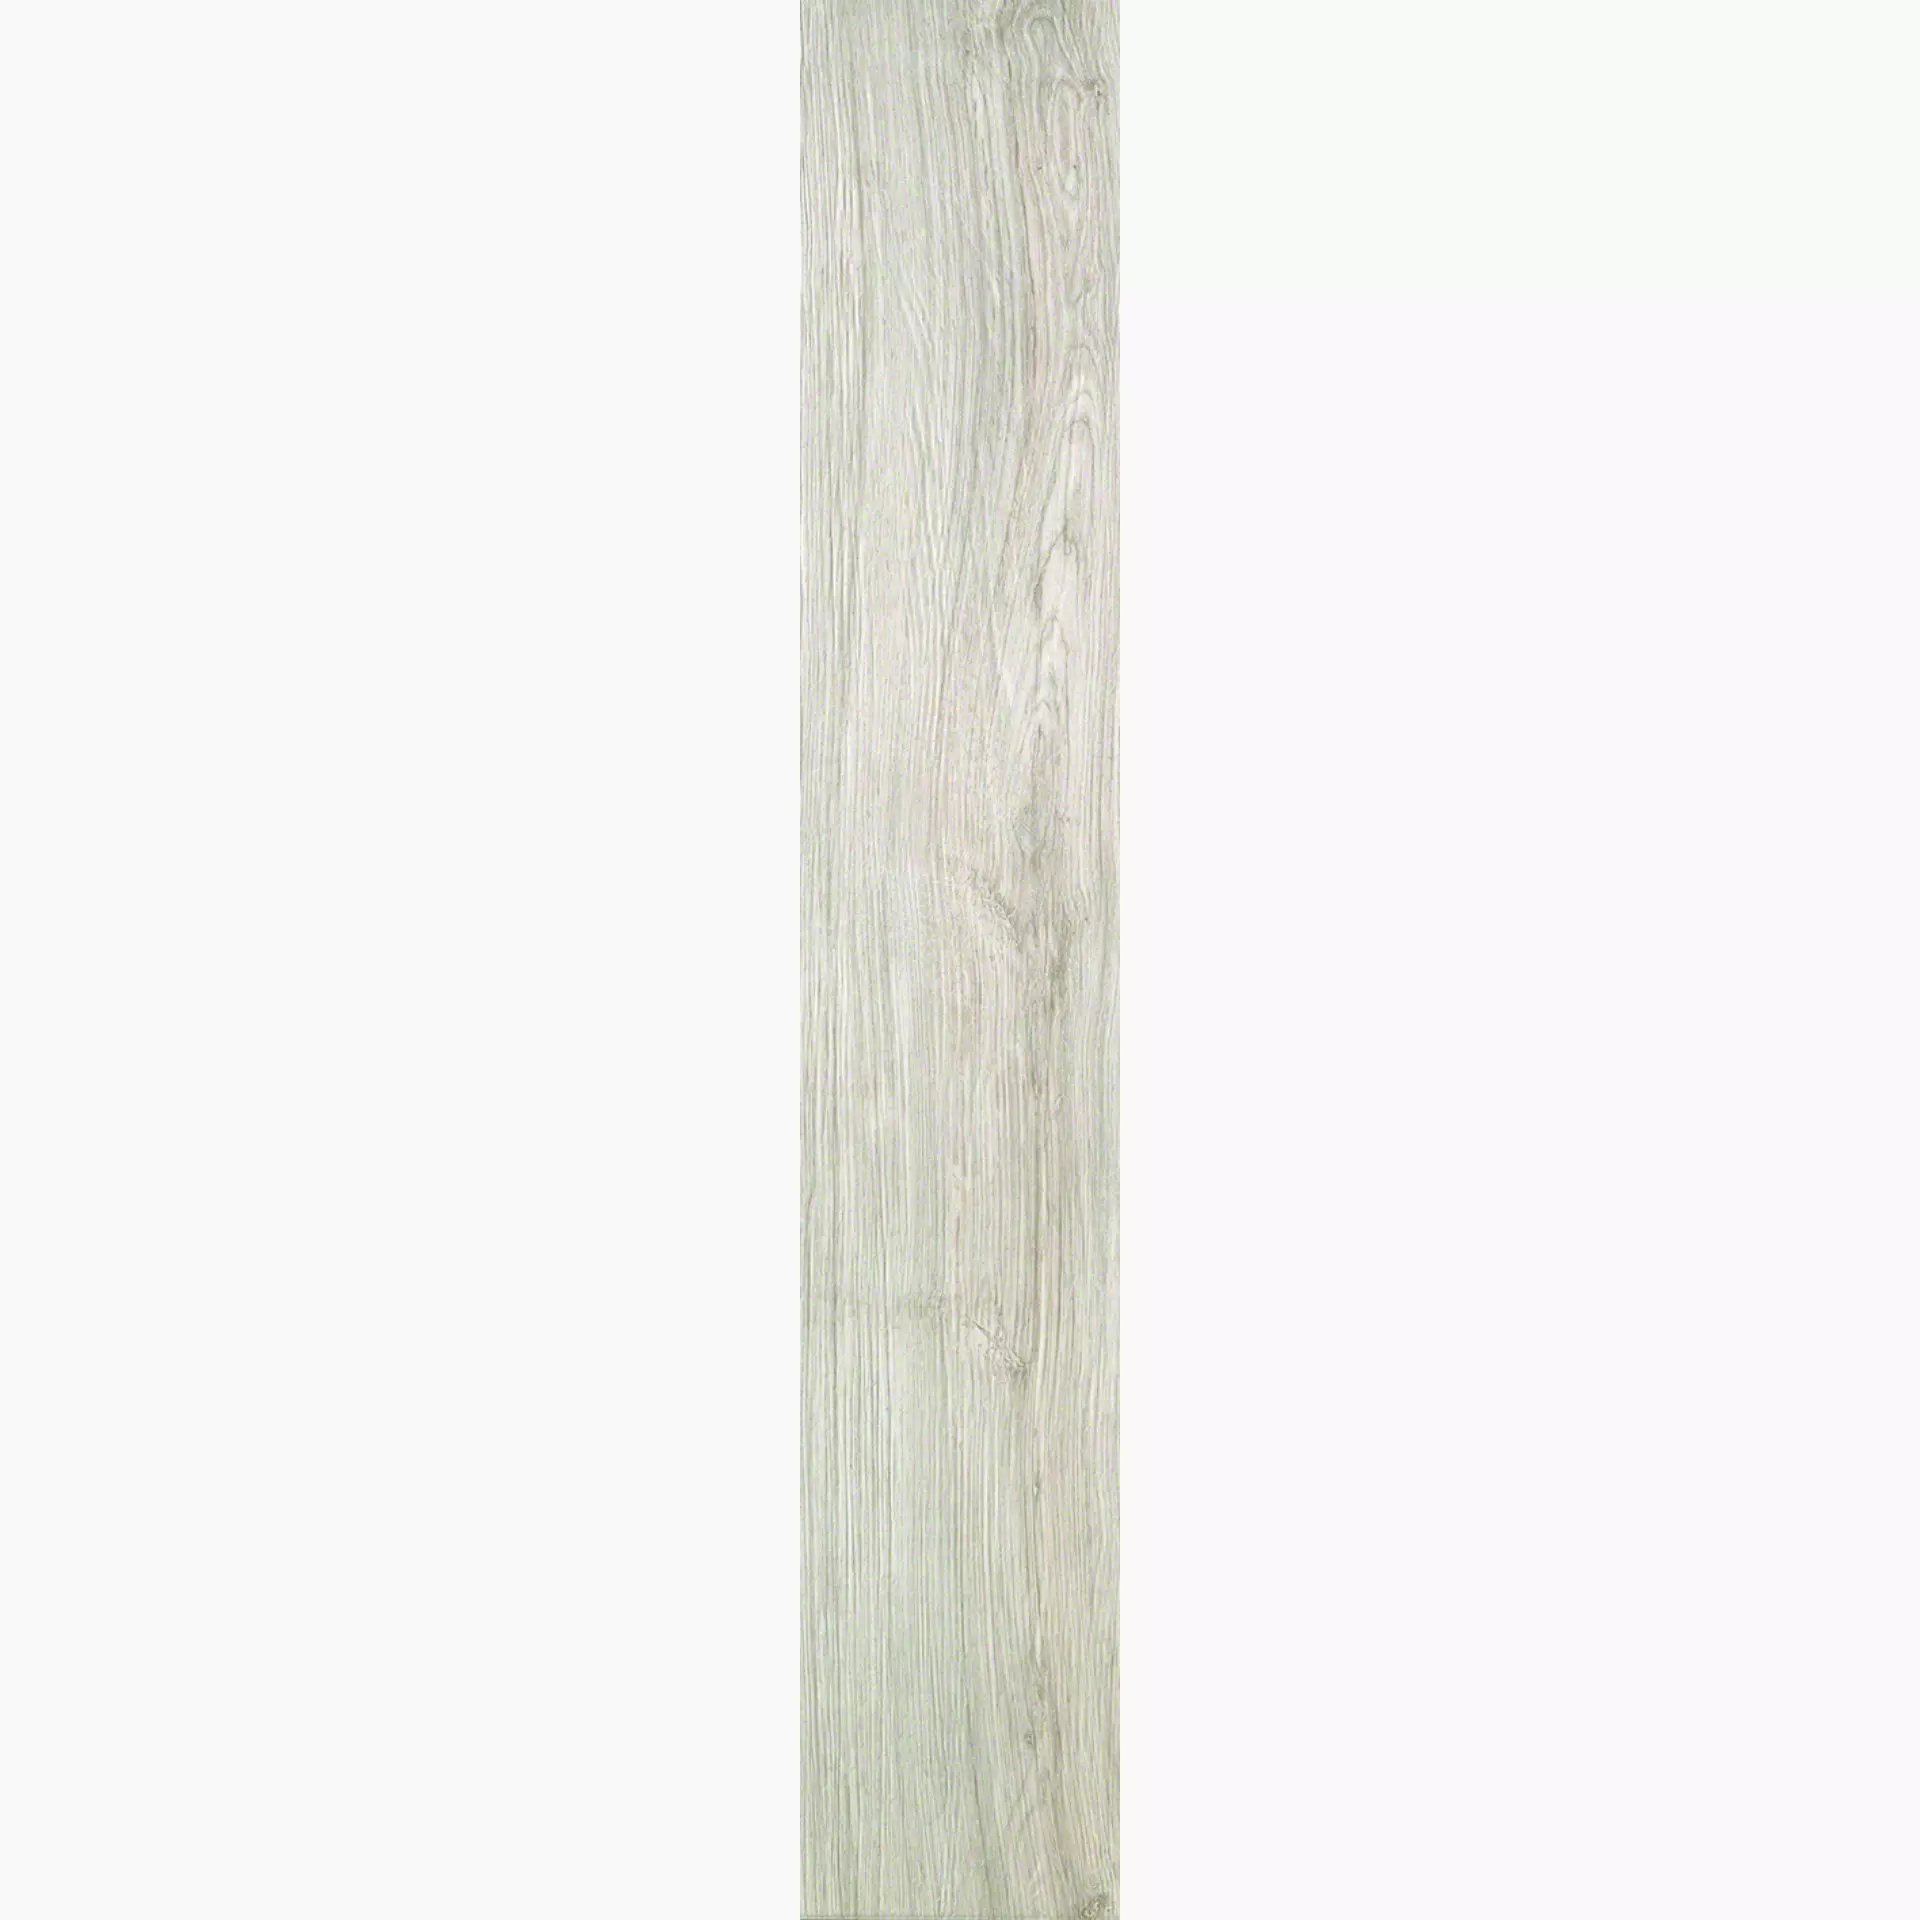 Serenissima Acanto Bianco Naturale 1047427 20x120cm rectified 9,5mm